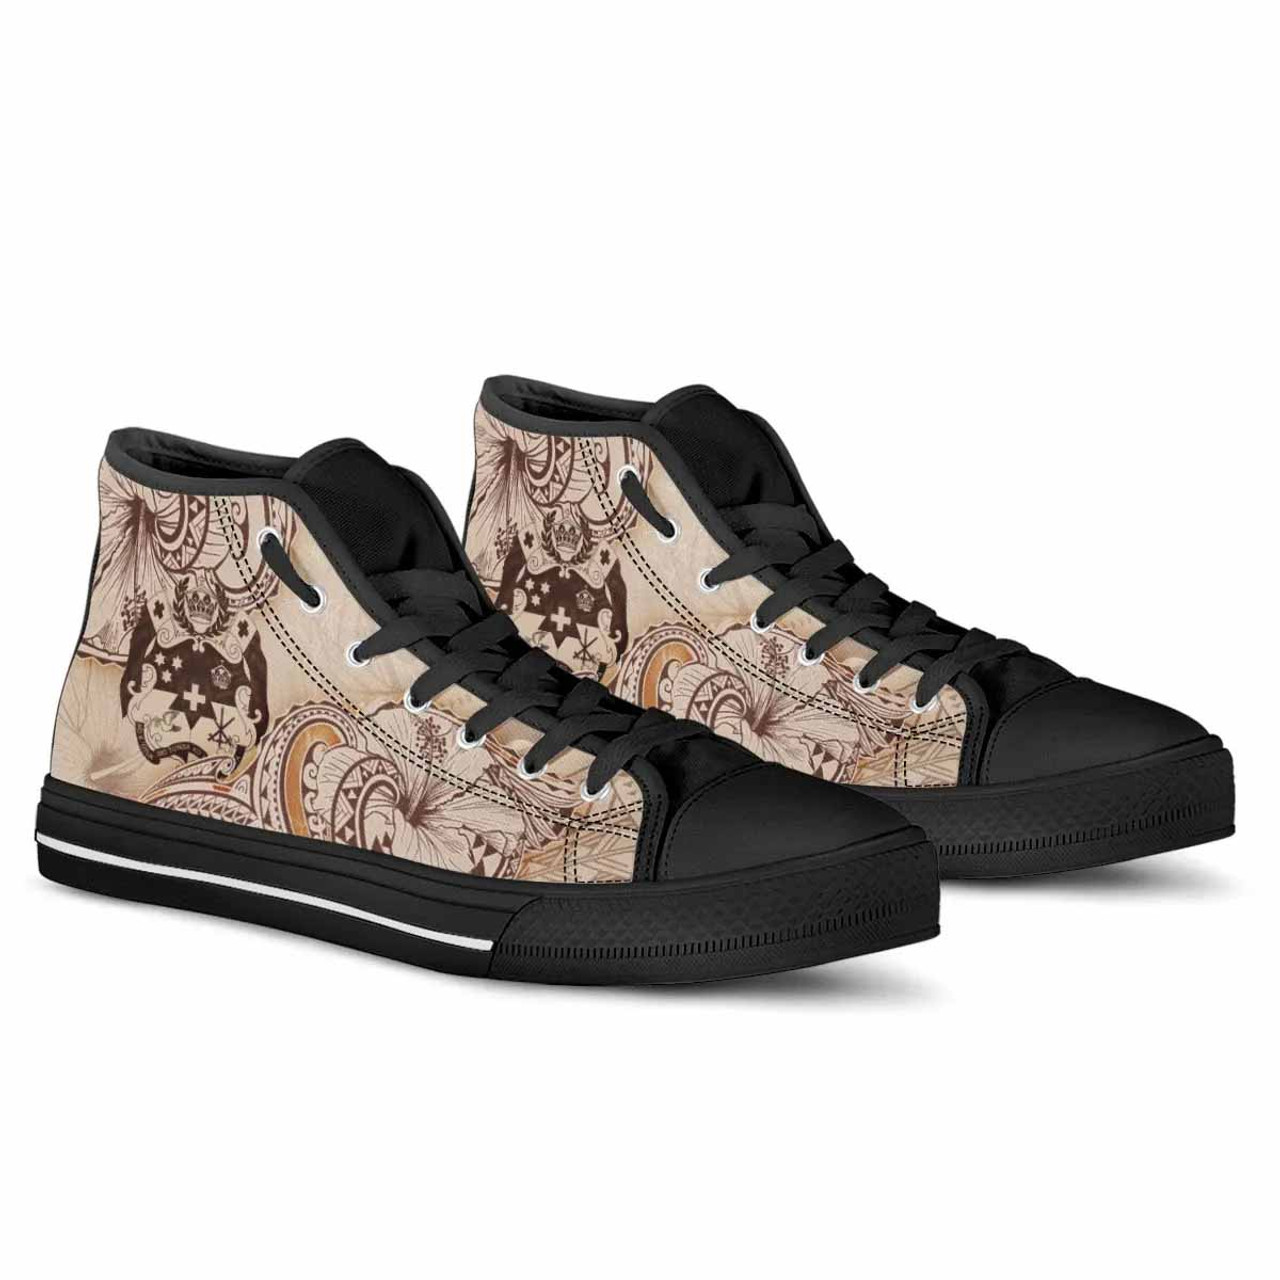 Tonga High Top Shoes - Hibiscus Flowers Vintage Style